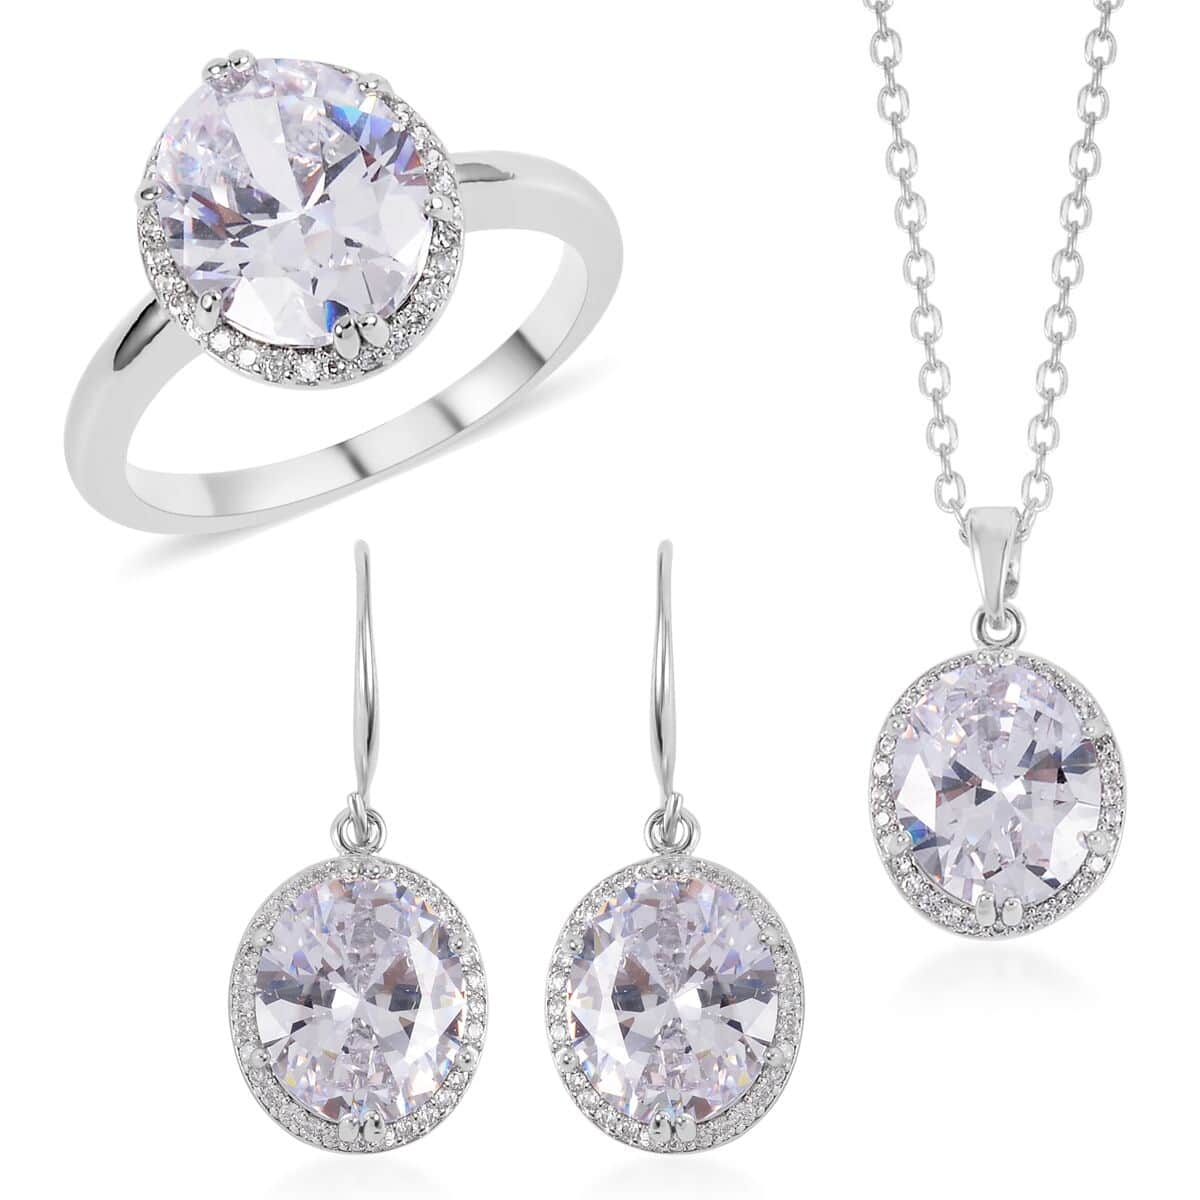 Simulated White Diamond Earrings, Halo Ring (Size 9.0) and Pendant Necklace in Silvertone 20-22 Inches image number 0